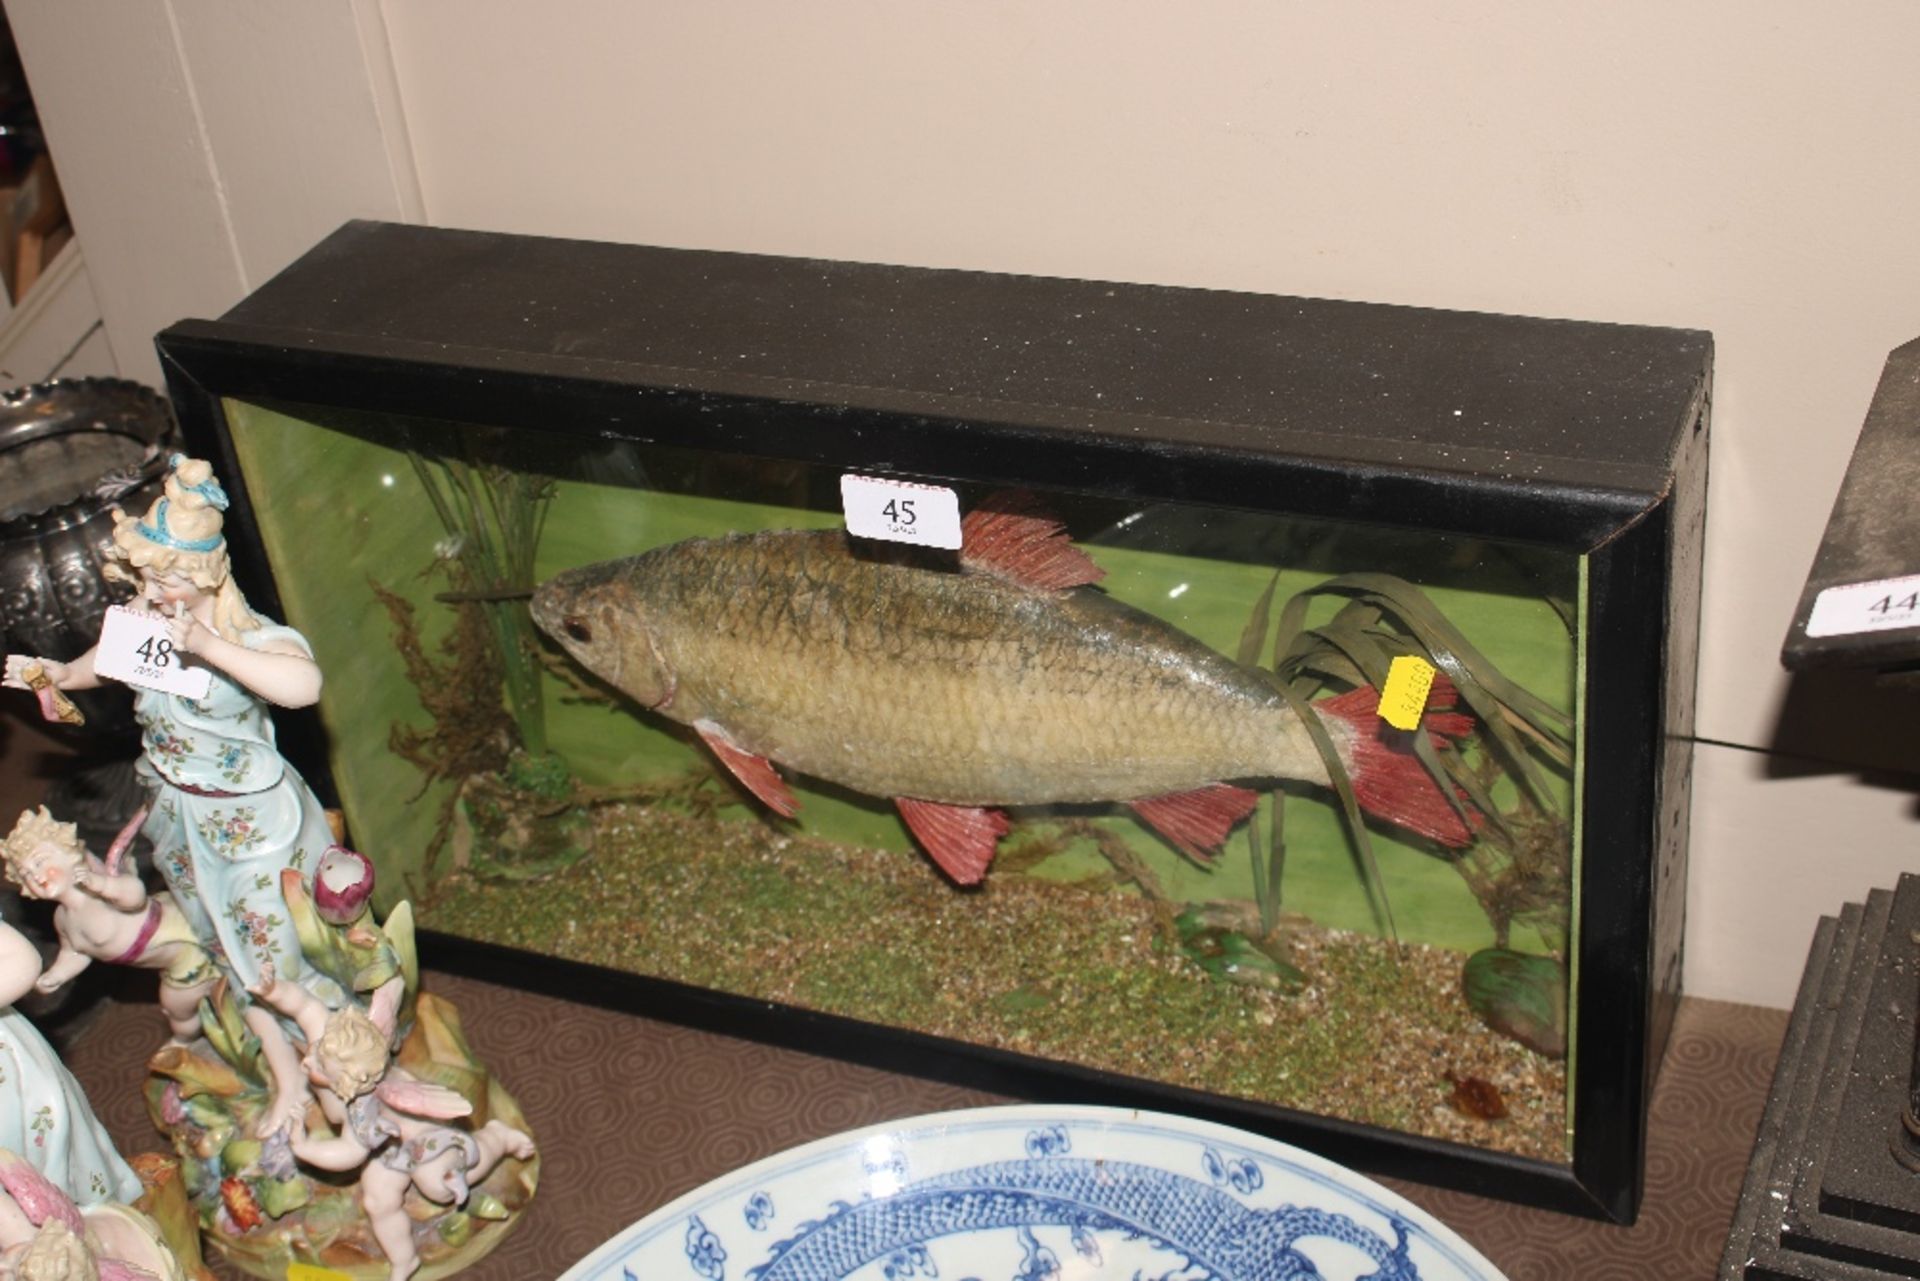 A cased and preserved roach